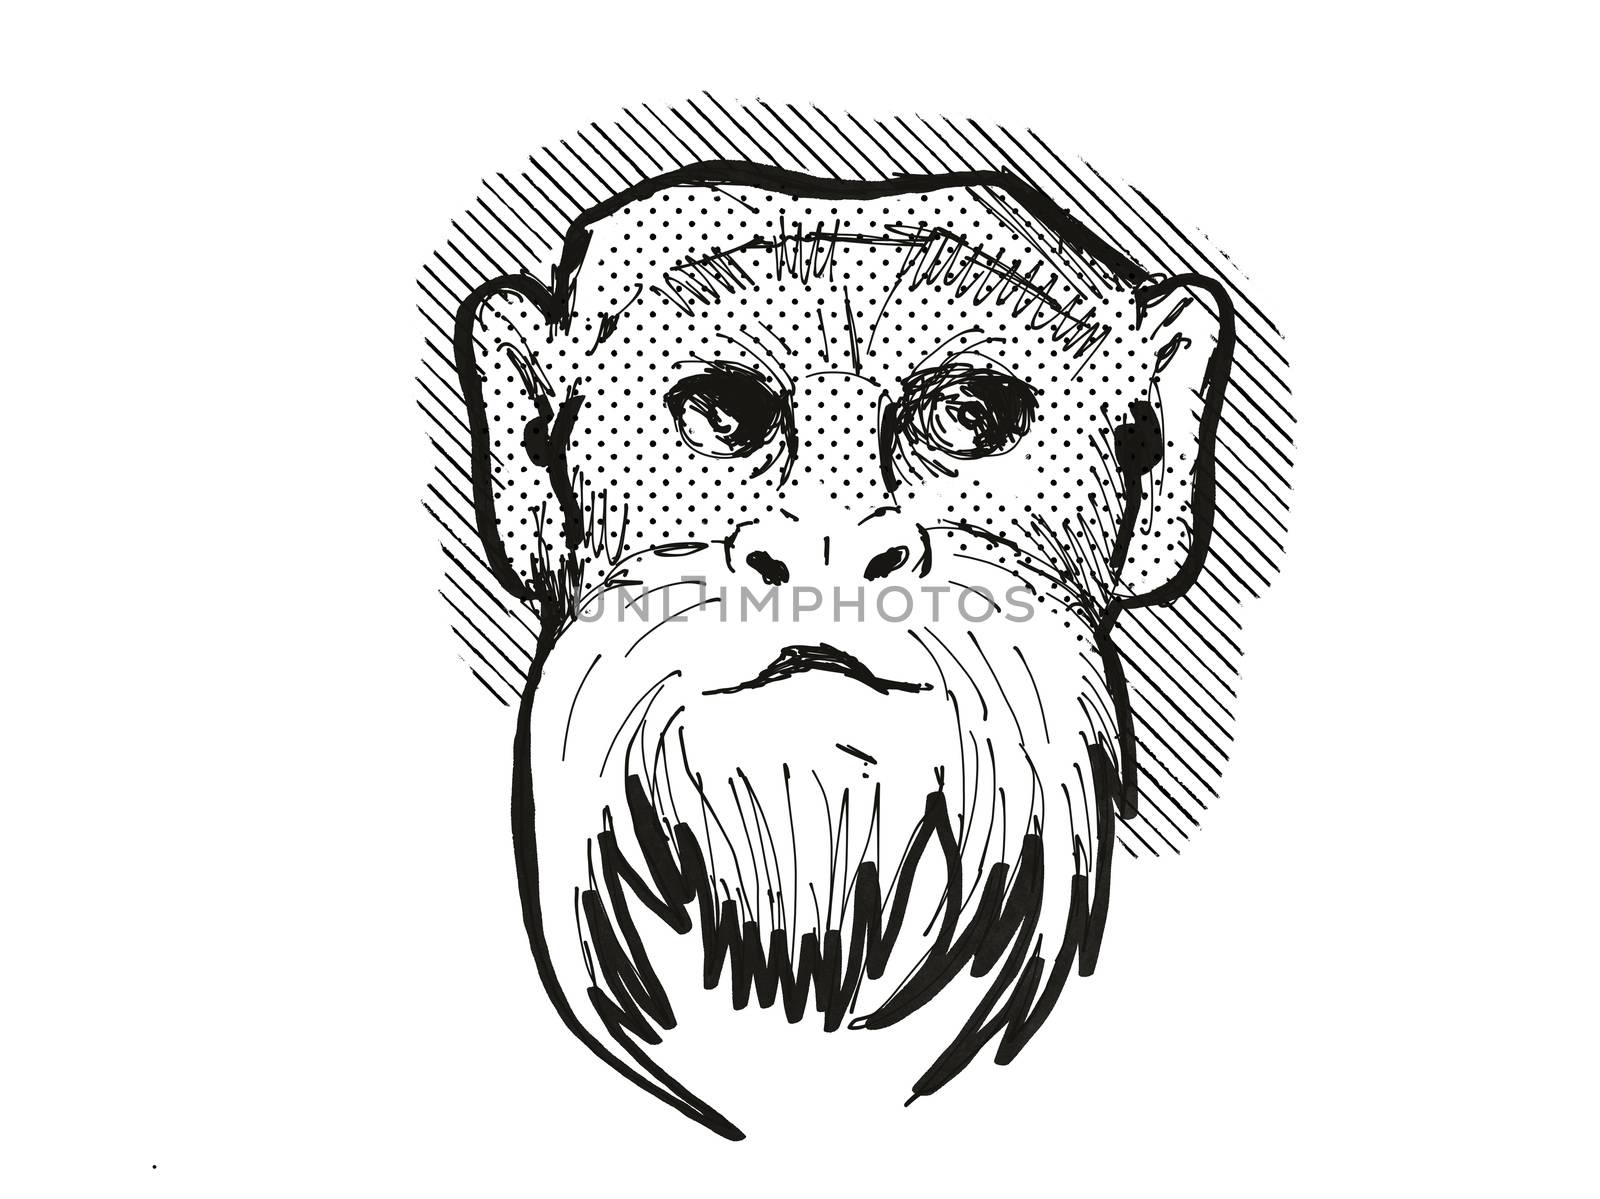 Retro cartoon style drawing head of an Emperor Tamarin , a monkey species viewed from front on isolated white background done in black and white